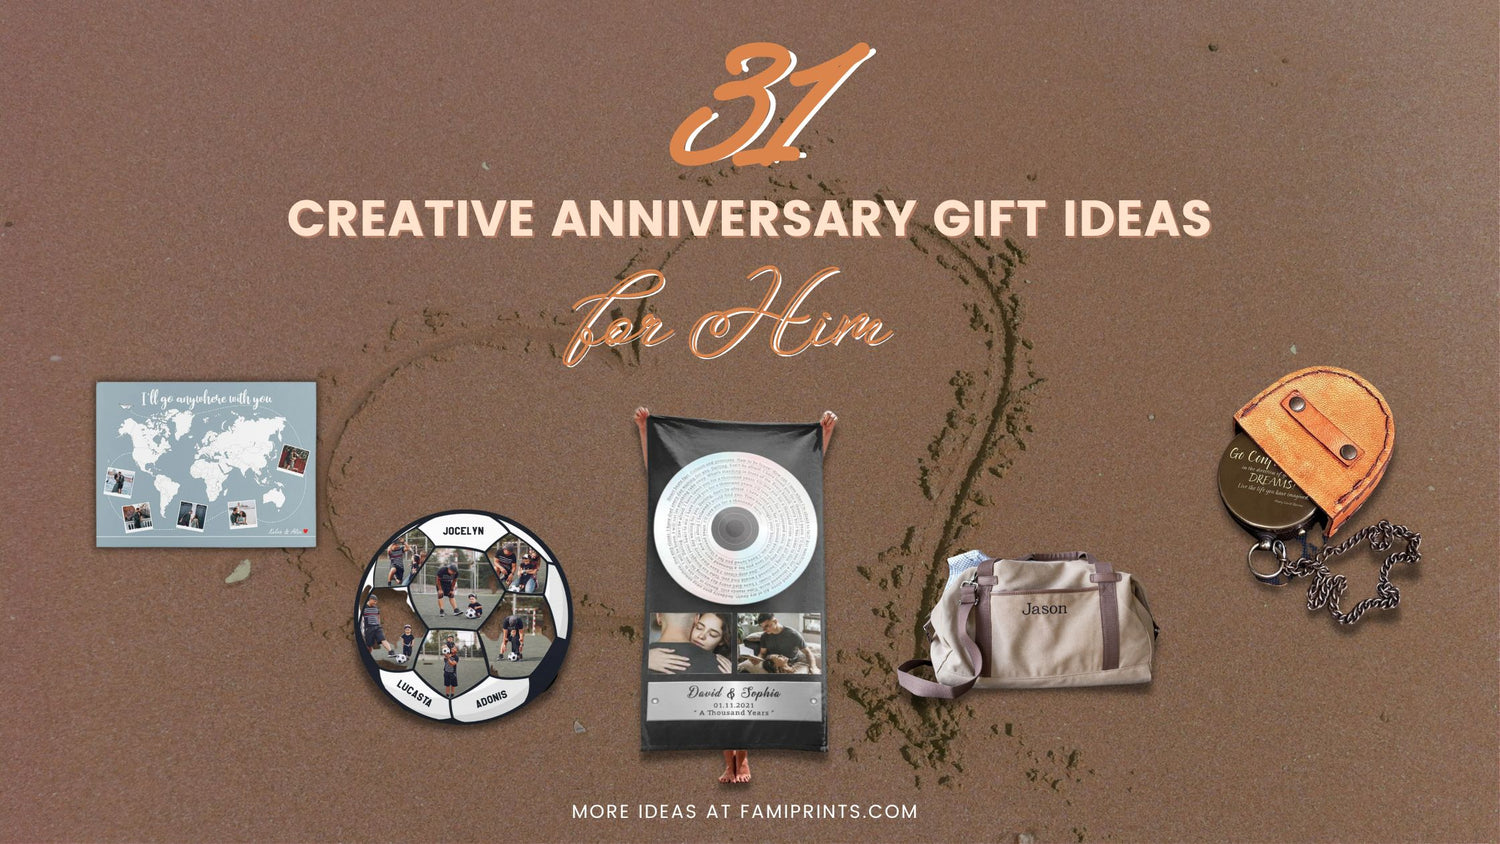 Anniversary Gifts for Her: Perfect Gift Ideas for Women